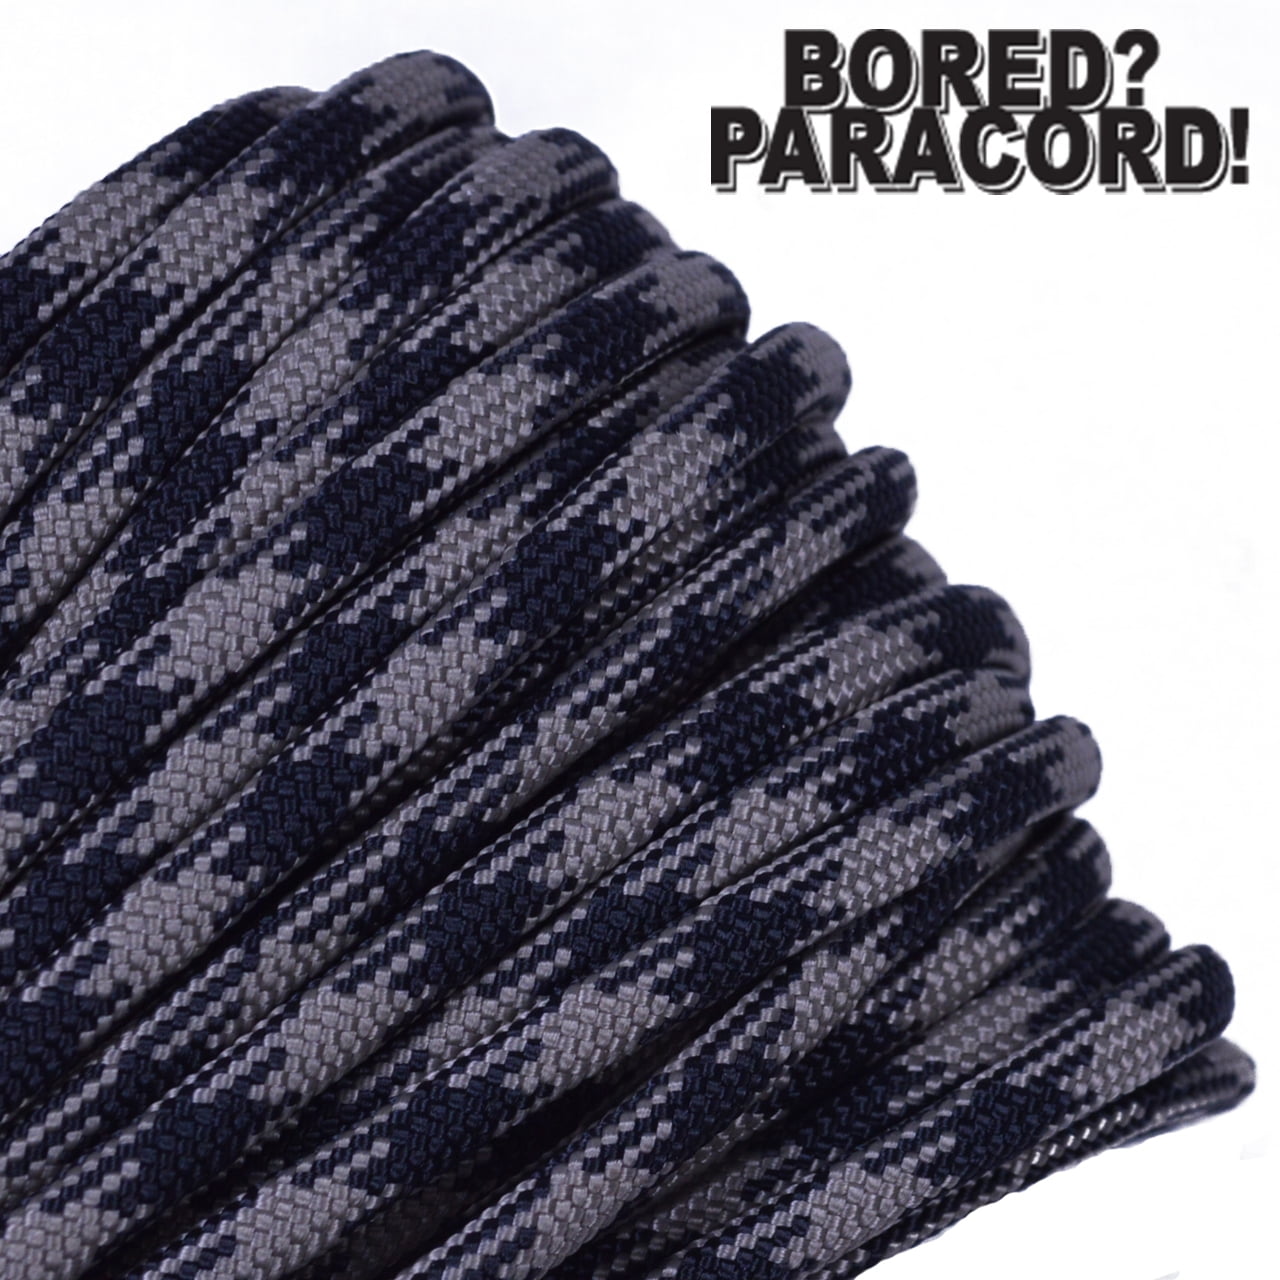 100 ft BoredParacord Brand 550 lb Paracord Over 300 Colors 